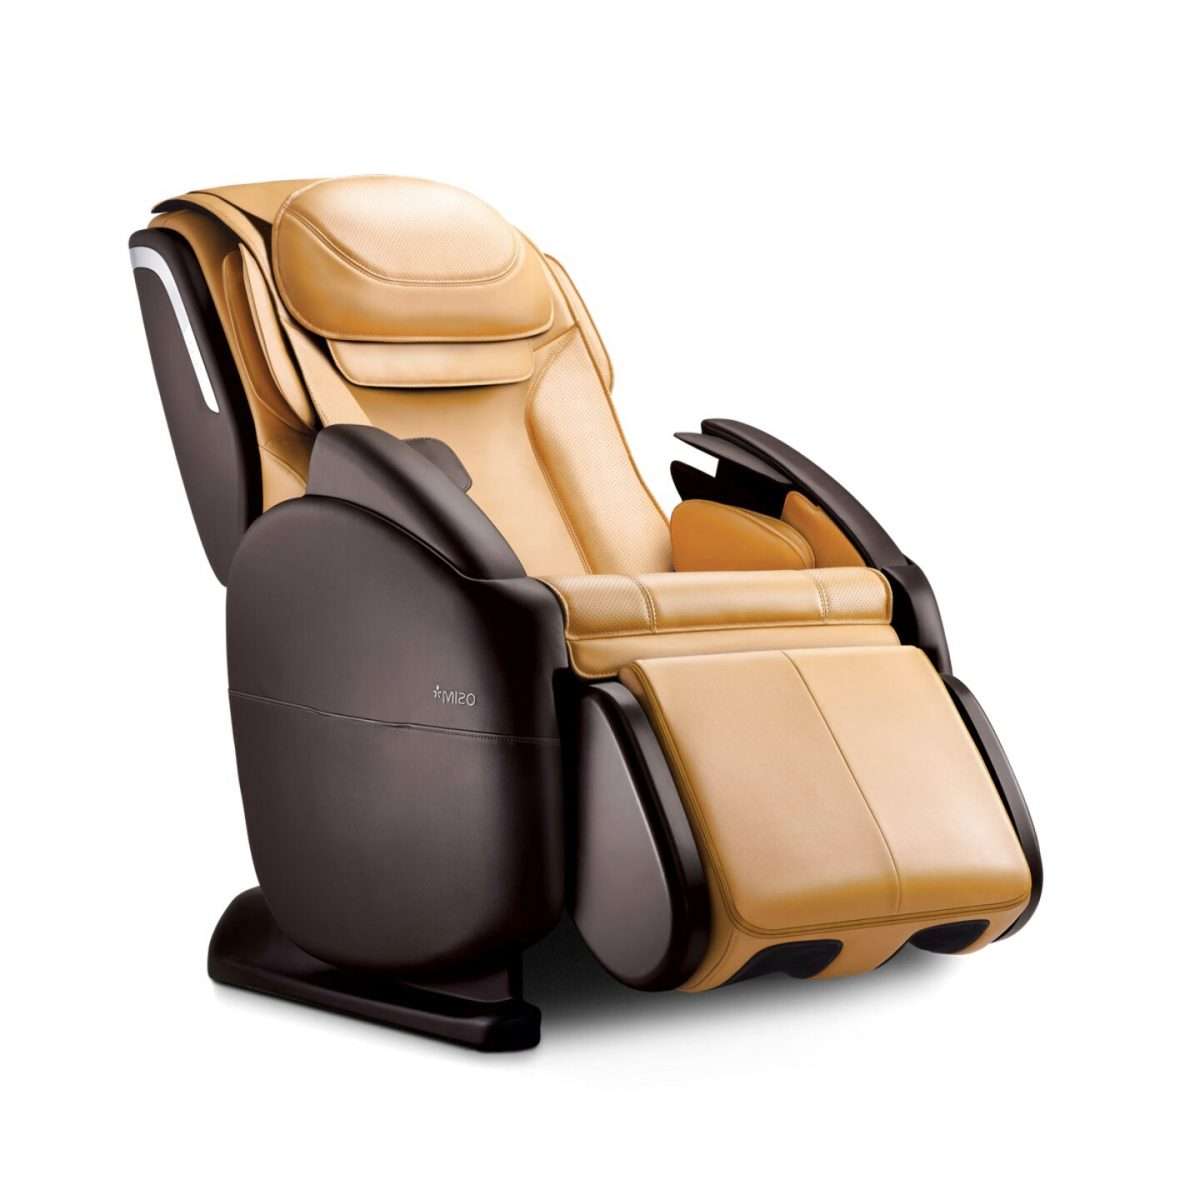 Massage Chair For Sale